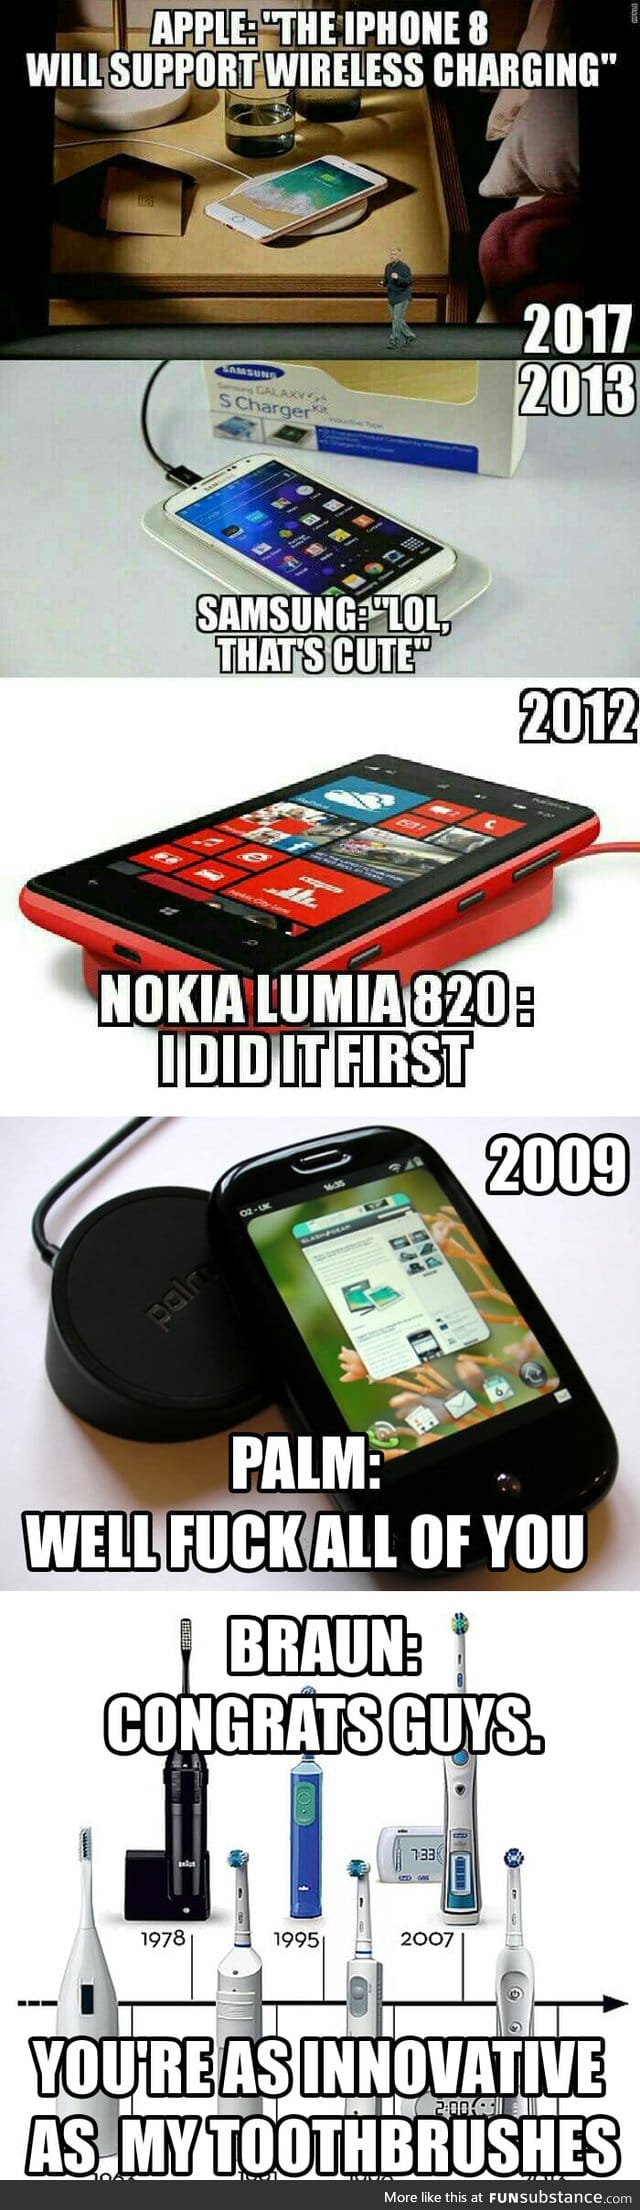 Wireless charging is old